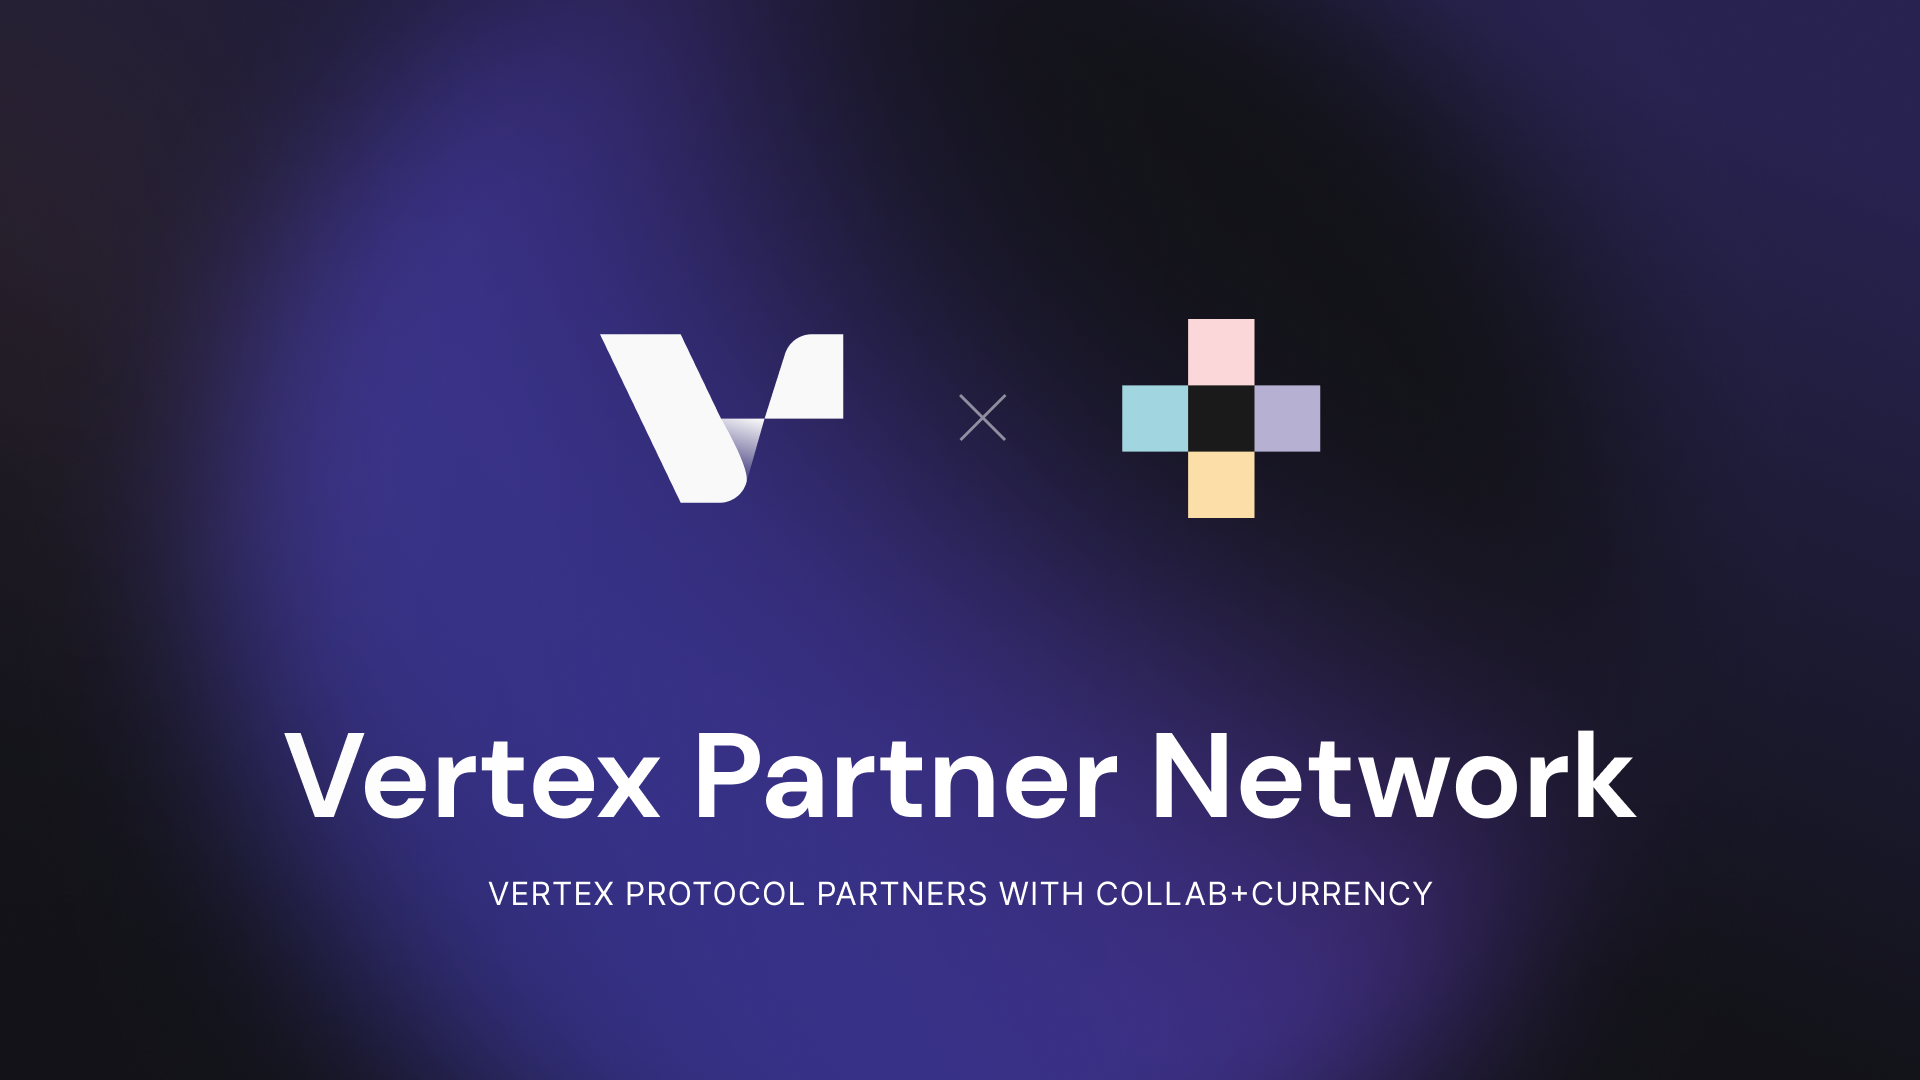 Introducing Collab+Currency to Vertex’s Partner Network